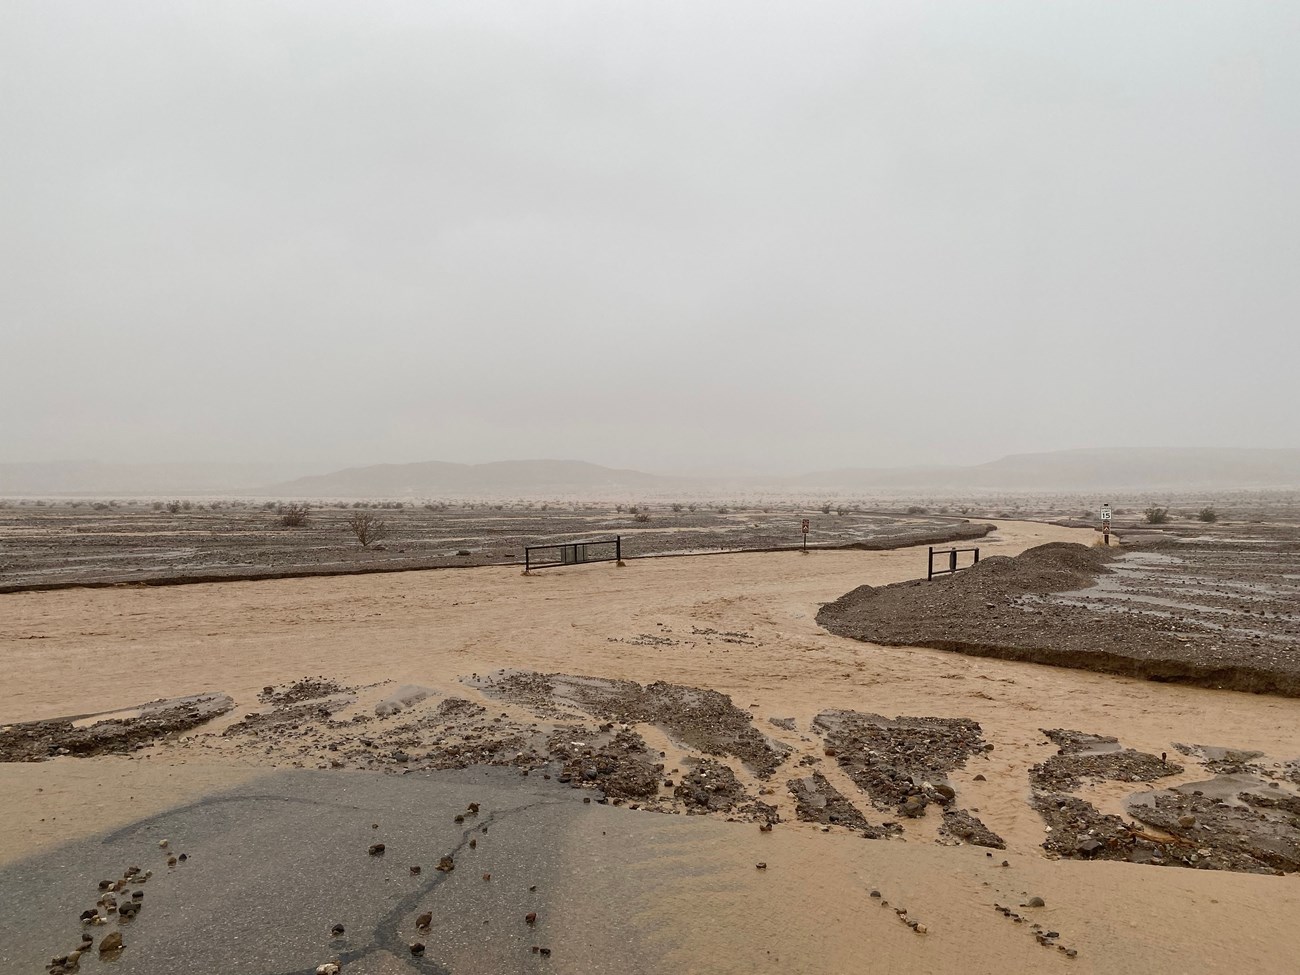 Monsoonal rain flooded Mud Canyon in Death Valley National Park on Aug. 5, 2022.